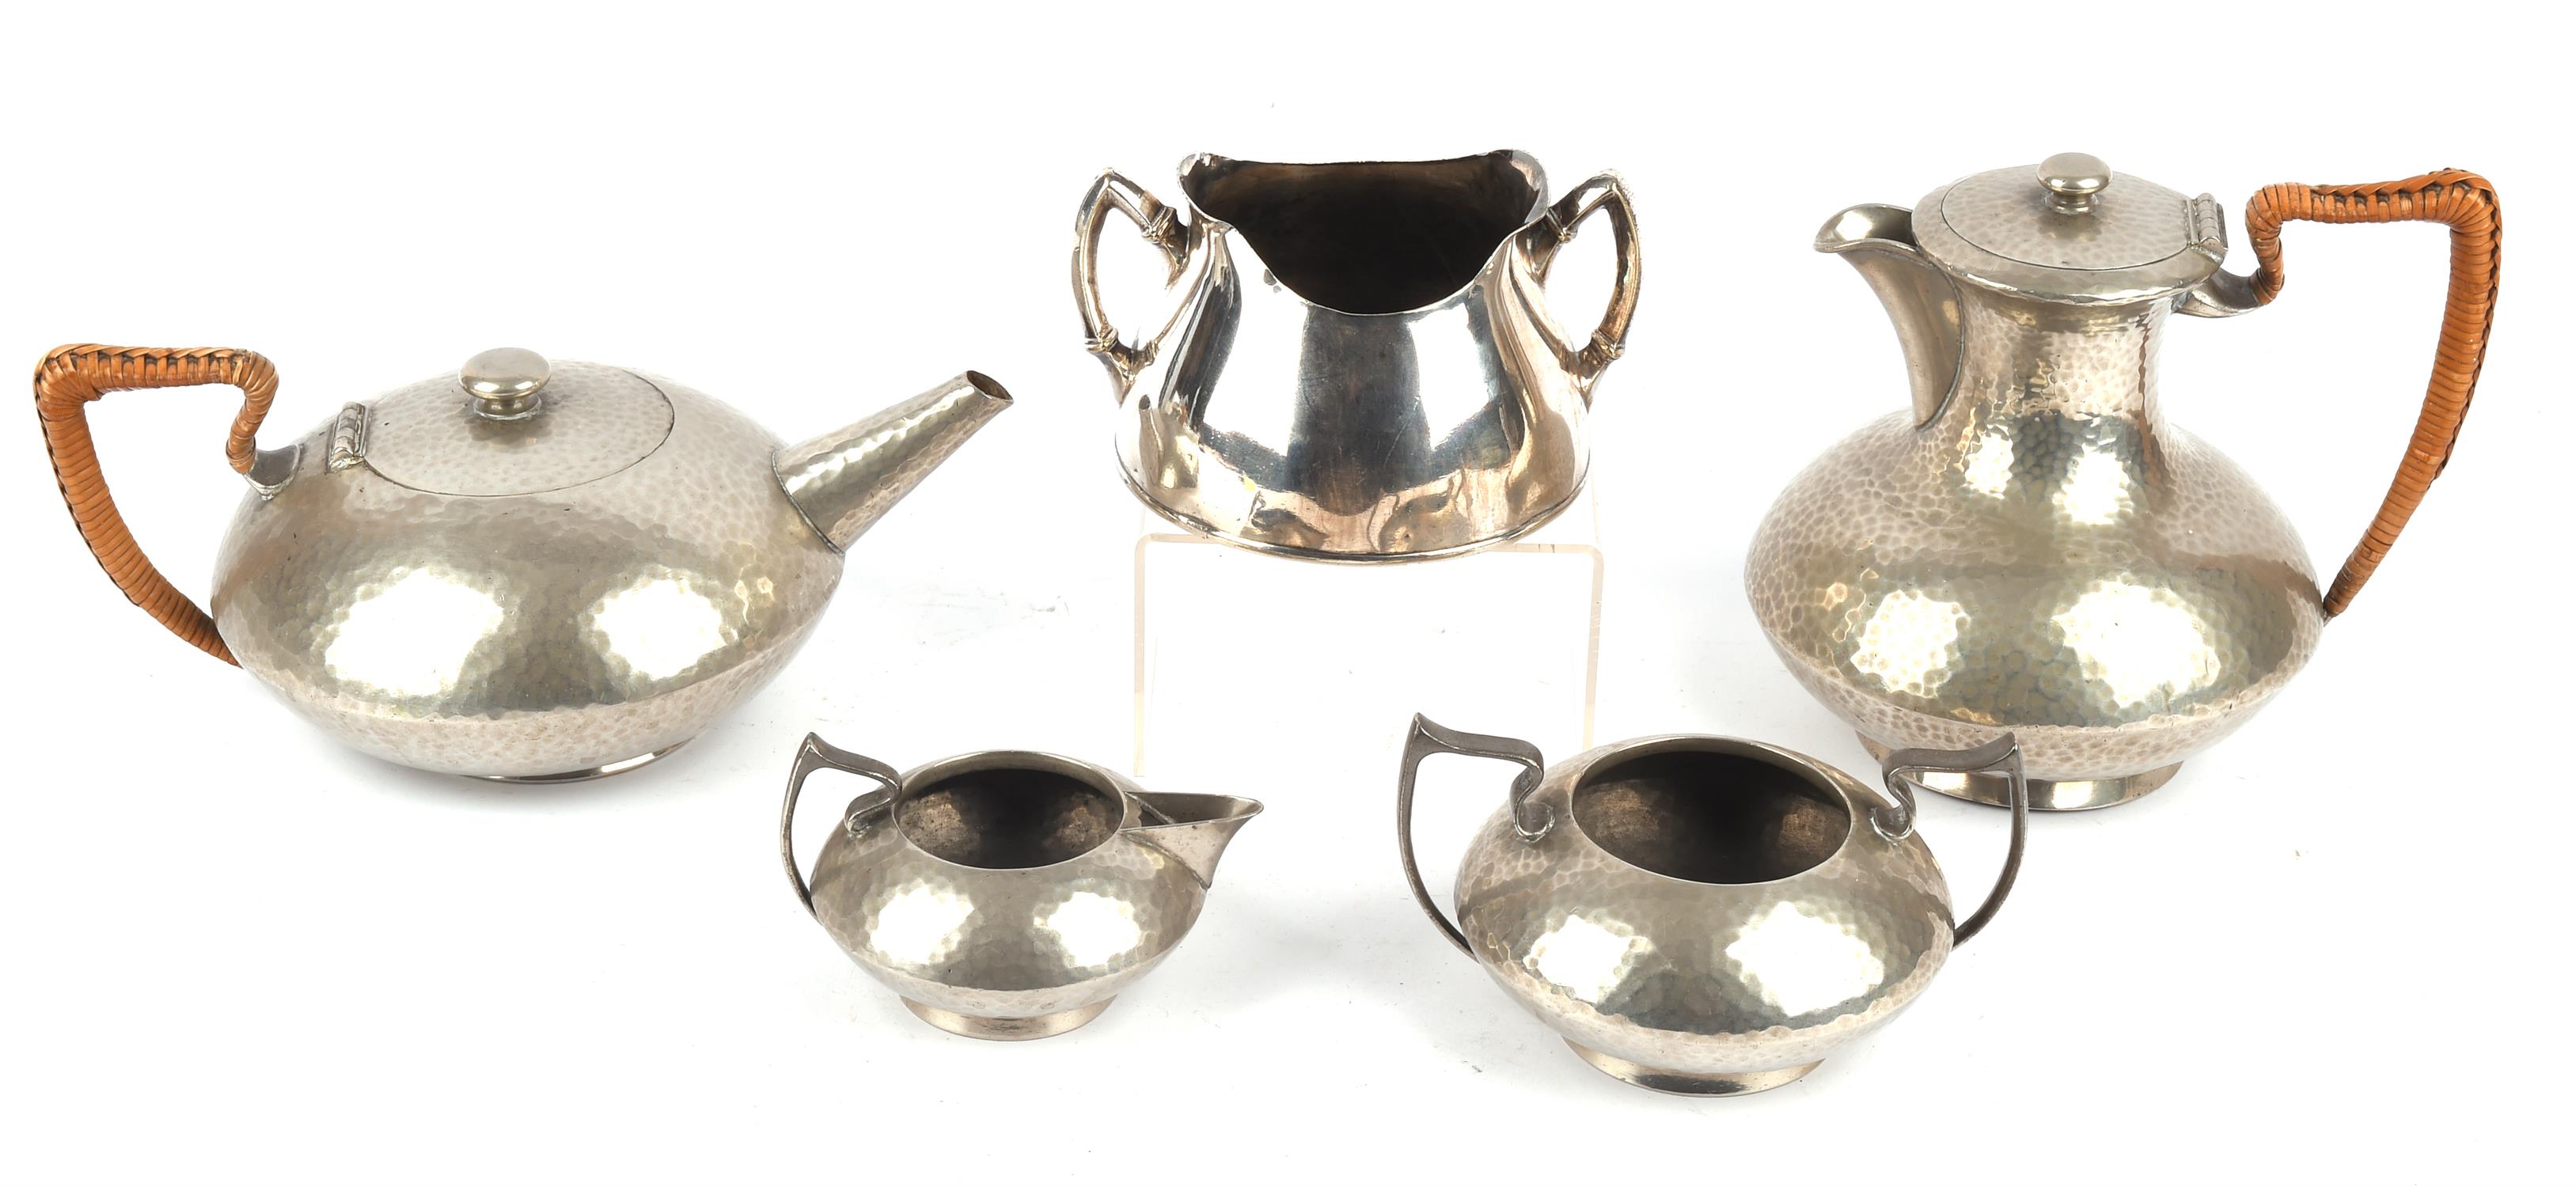 An English Pewter four piece tea and coffee set, planished and with raffia handles,